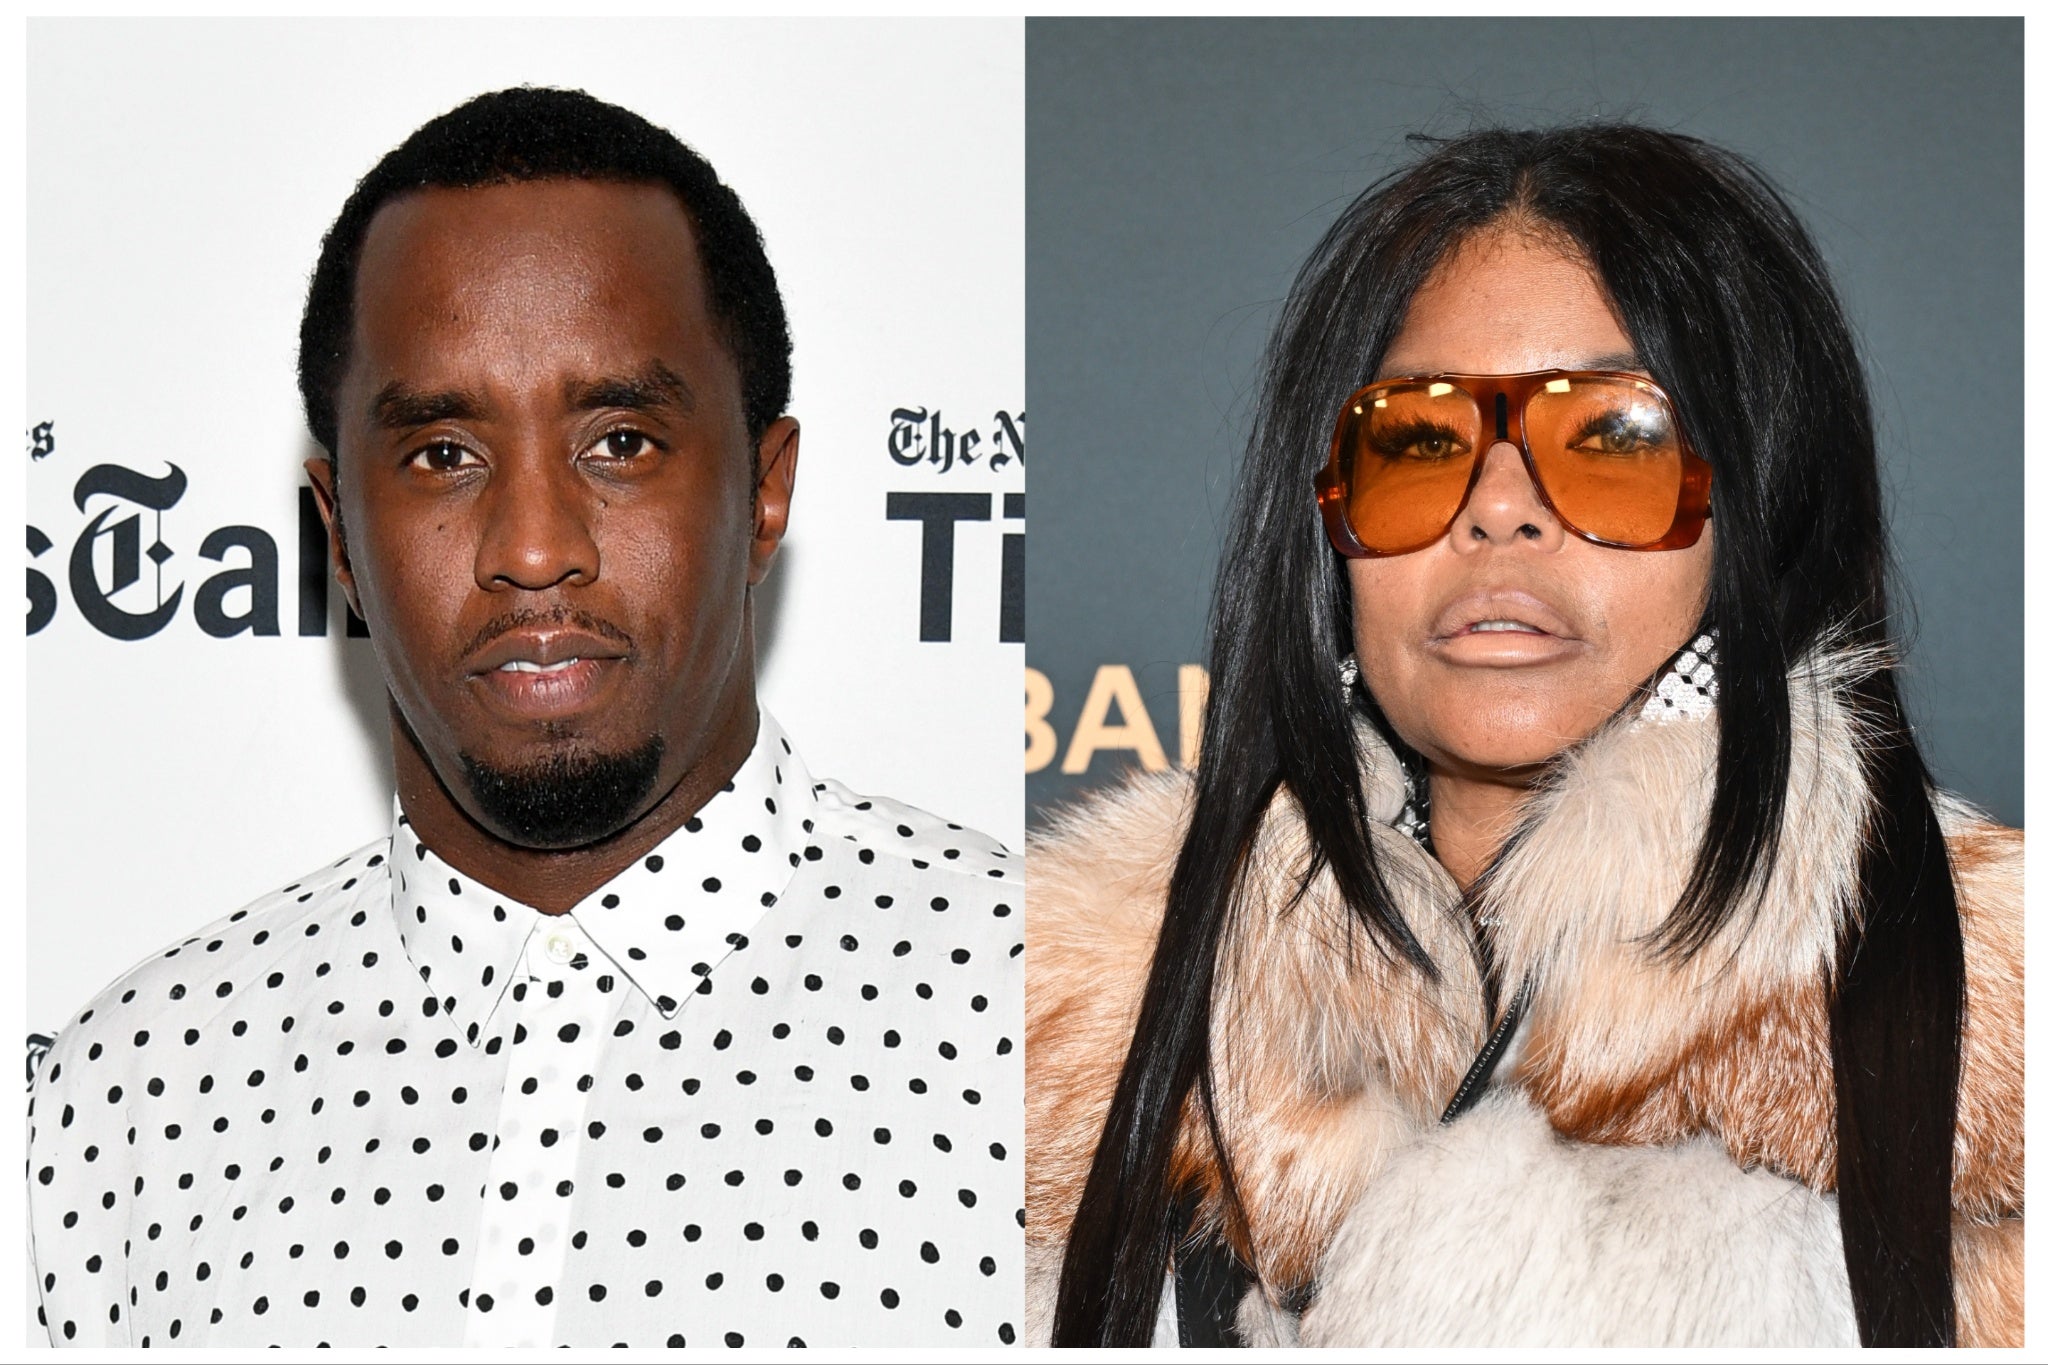 Sean ‘Diddy’ Combs and Misa Hylton, who share a 30-year-old son Justin